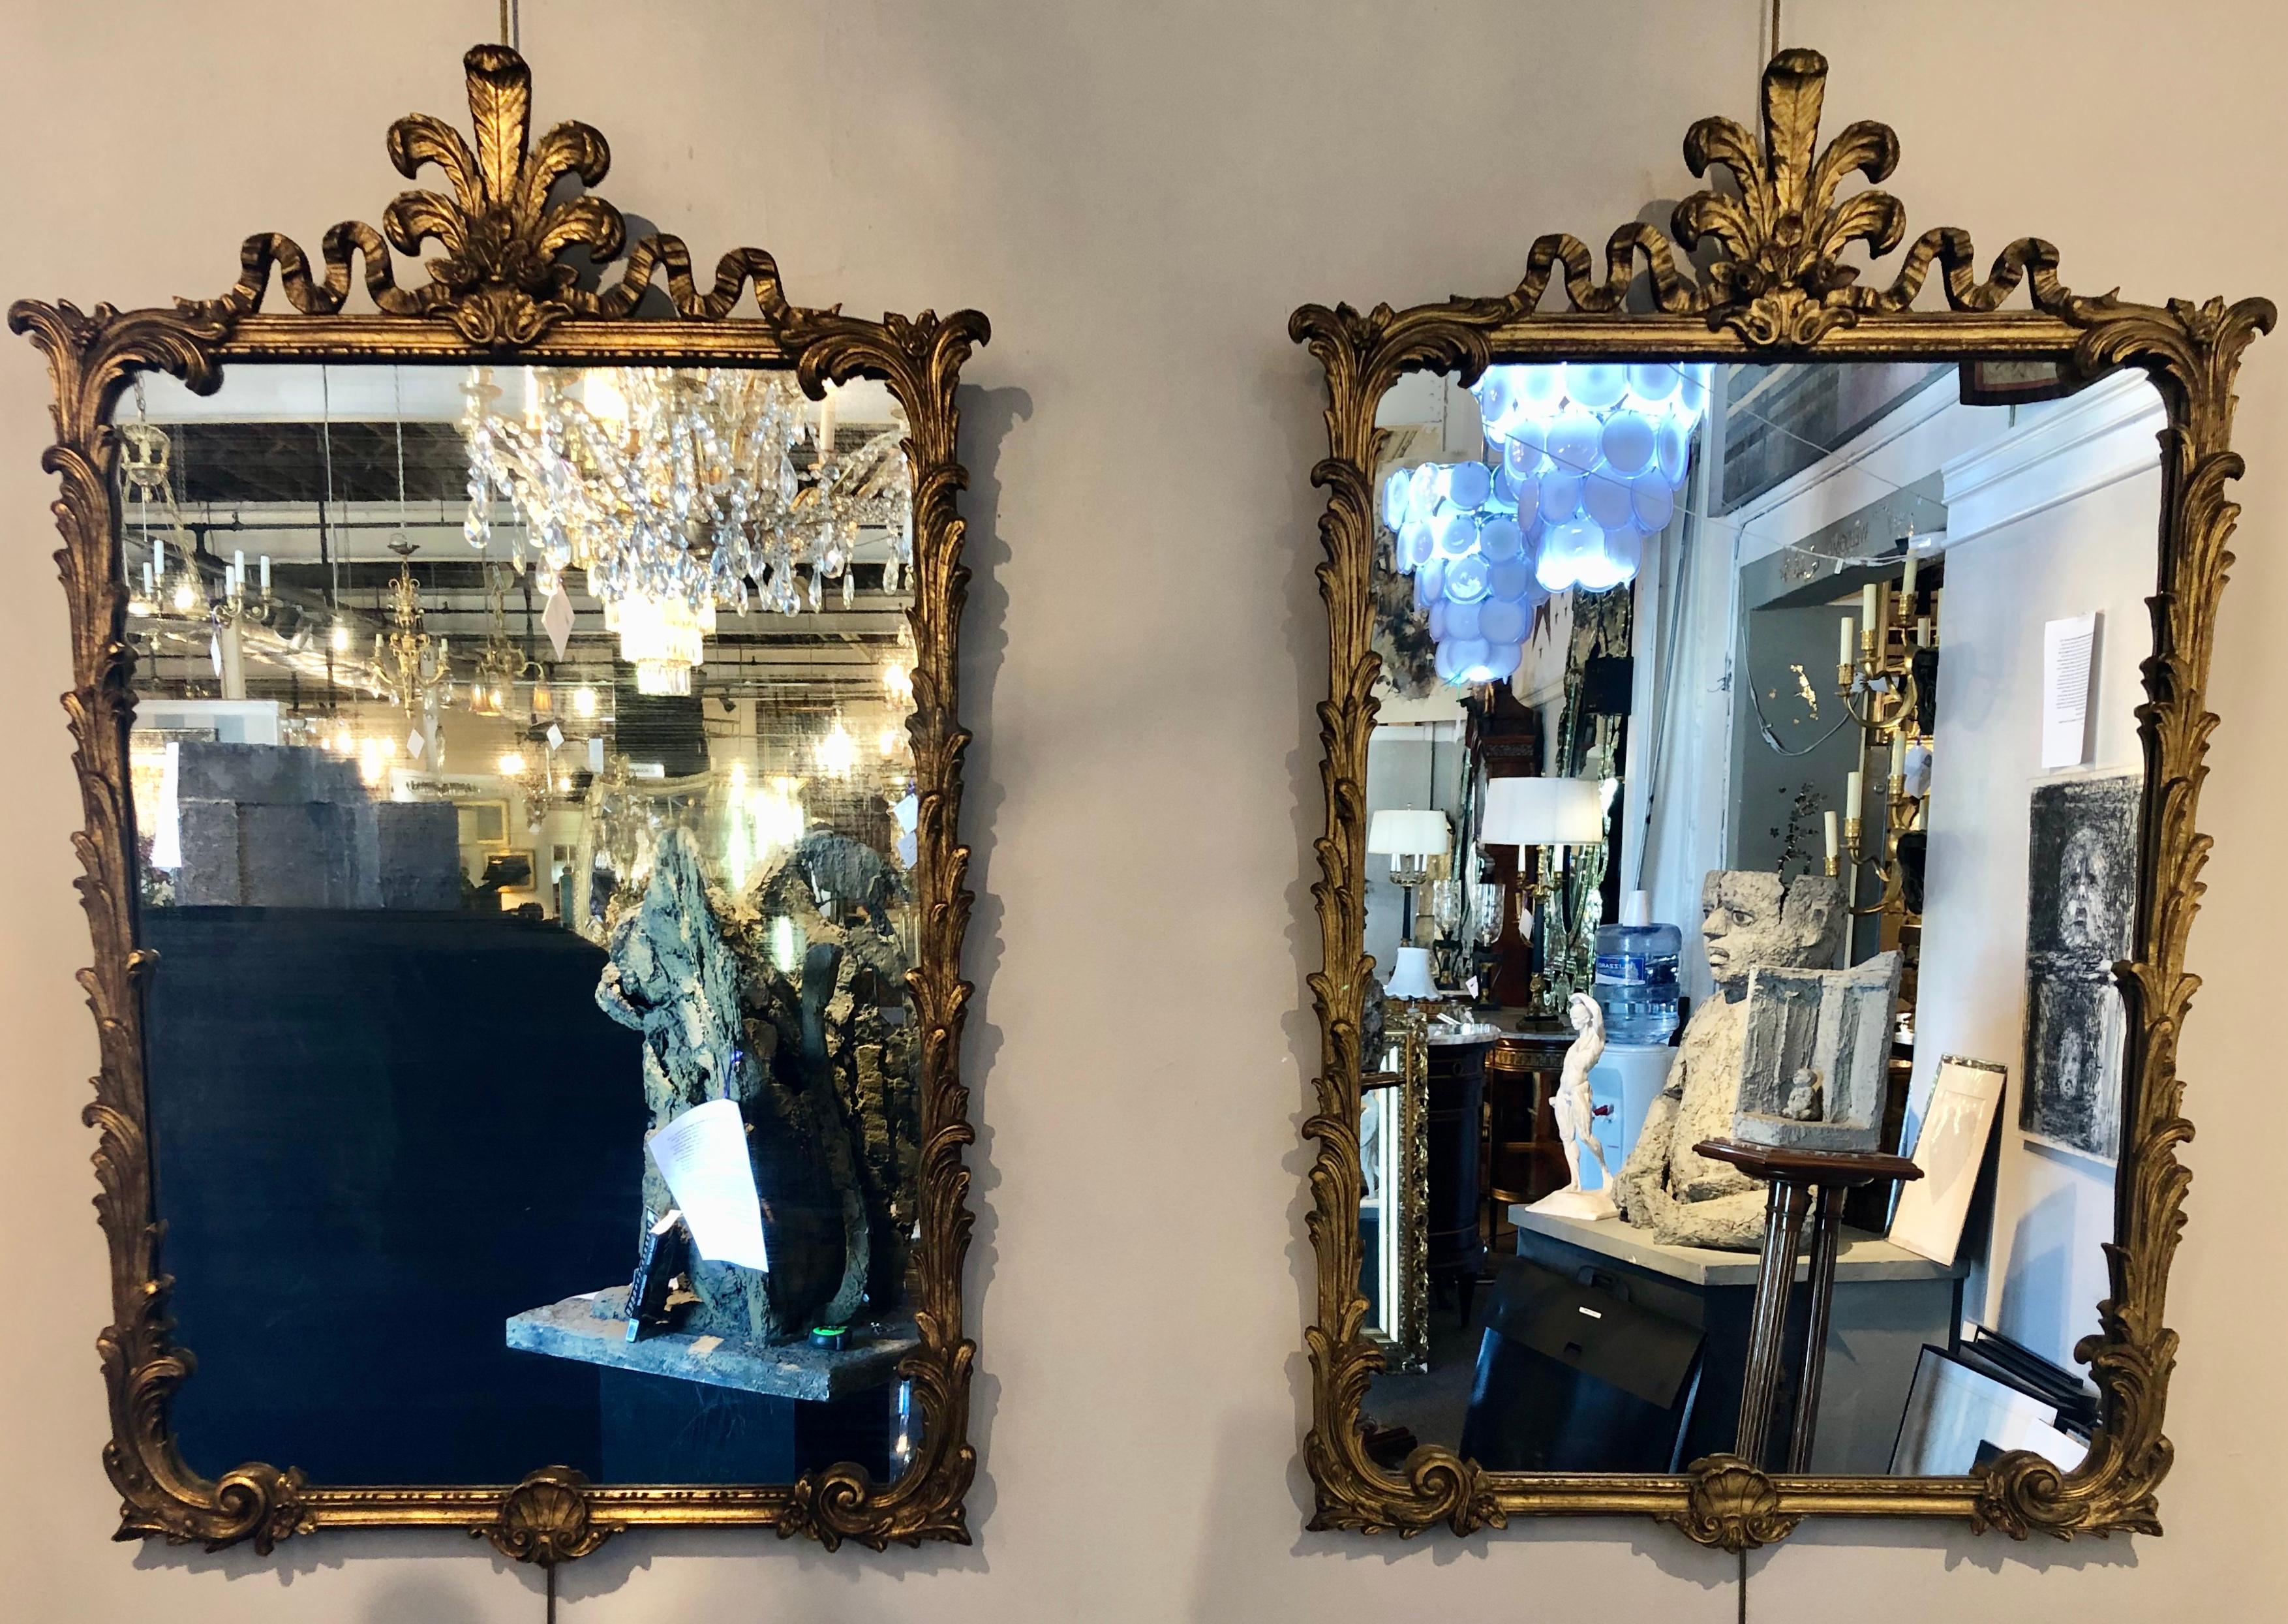 Pair of Louis XV style giltwood wall or console mirrors. Italian finely carved pair of giltwood mirrors with feather and leaf, floral rose design framing a center mirror.


ZSXX.